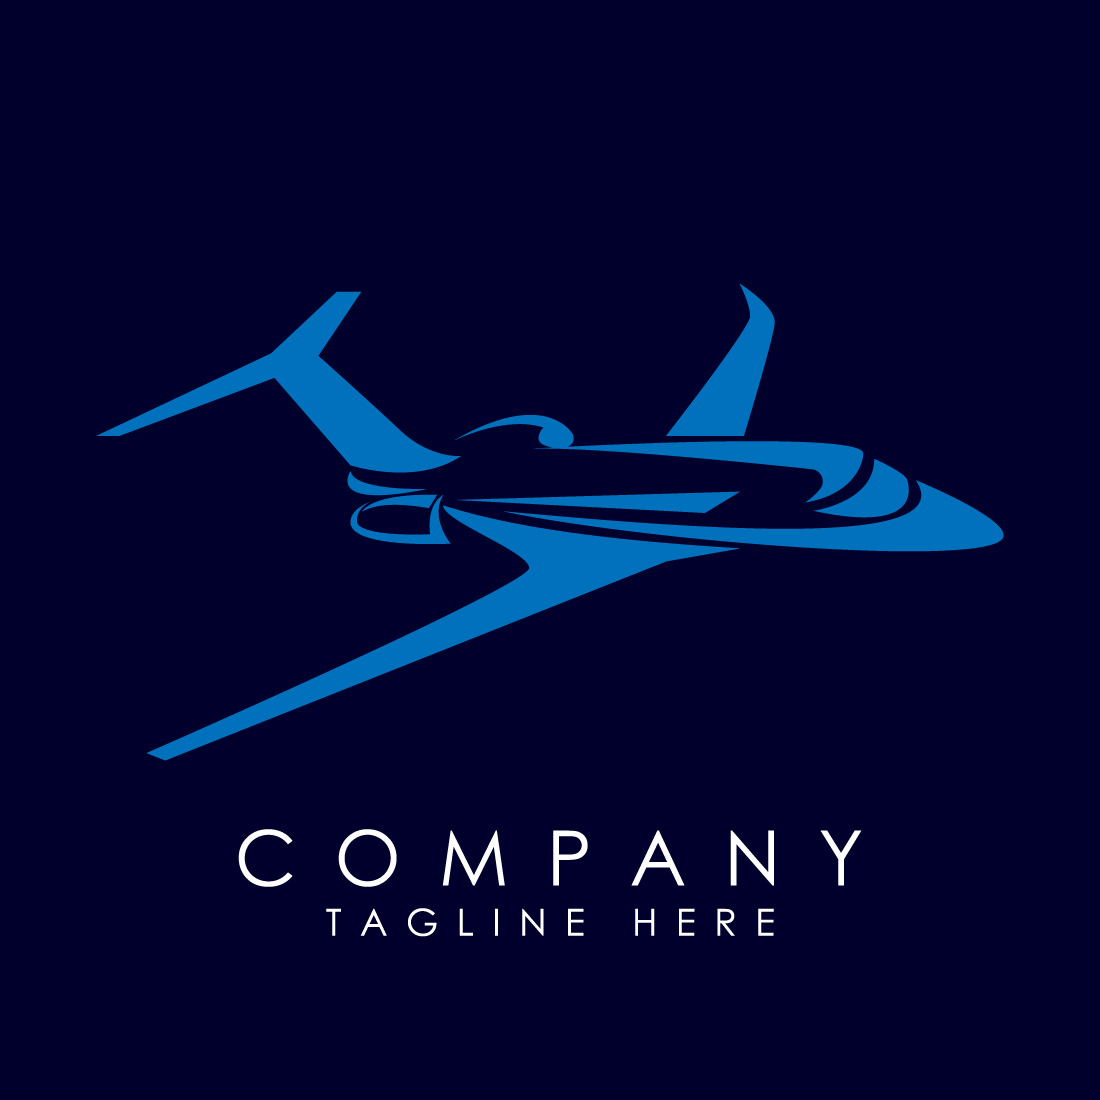 Airplane fly out logo plane taking off stylized vector image on VectorStock  | Travel agency logo, Aviation logo, Online logo design